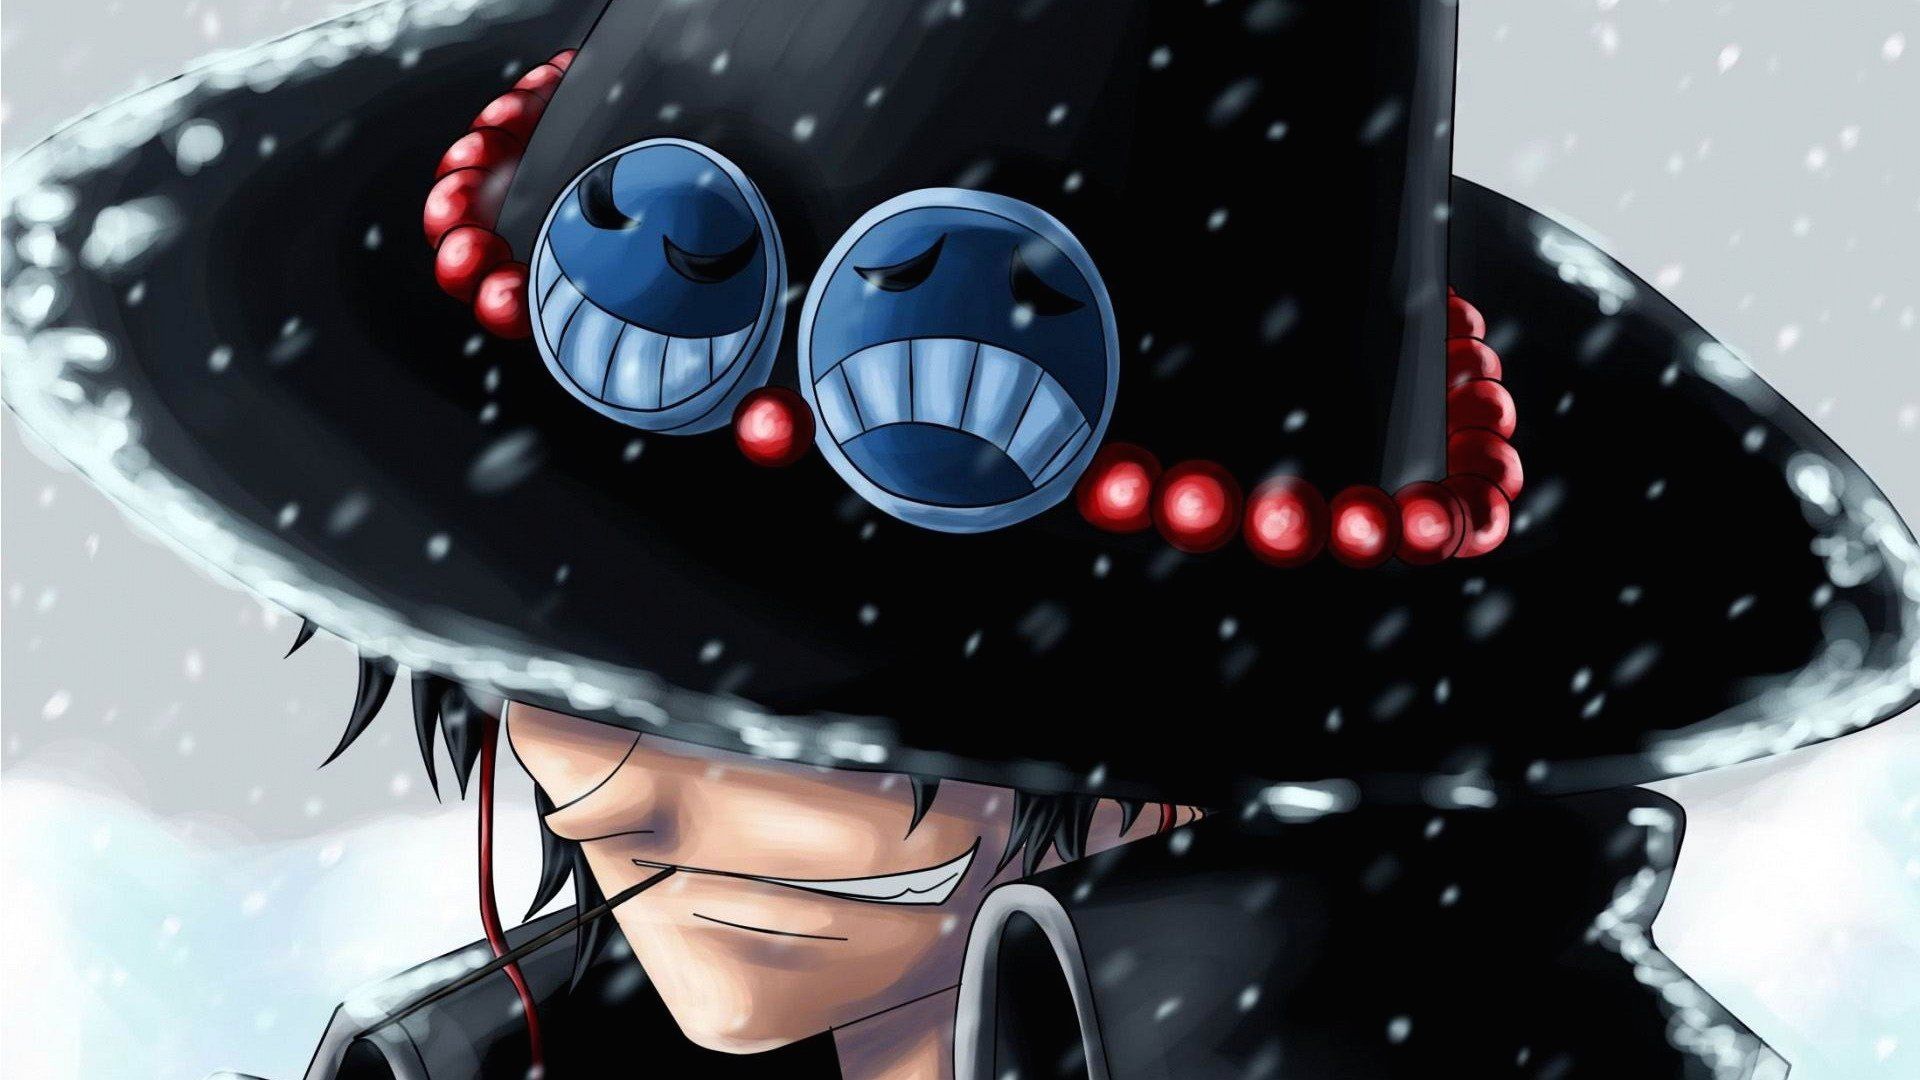 Awesome Anime Wallpapers - Black Ace One Piece - HD Wallpaper 